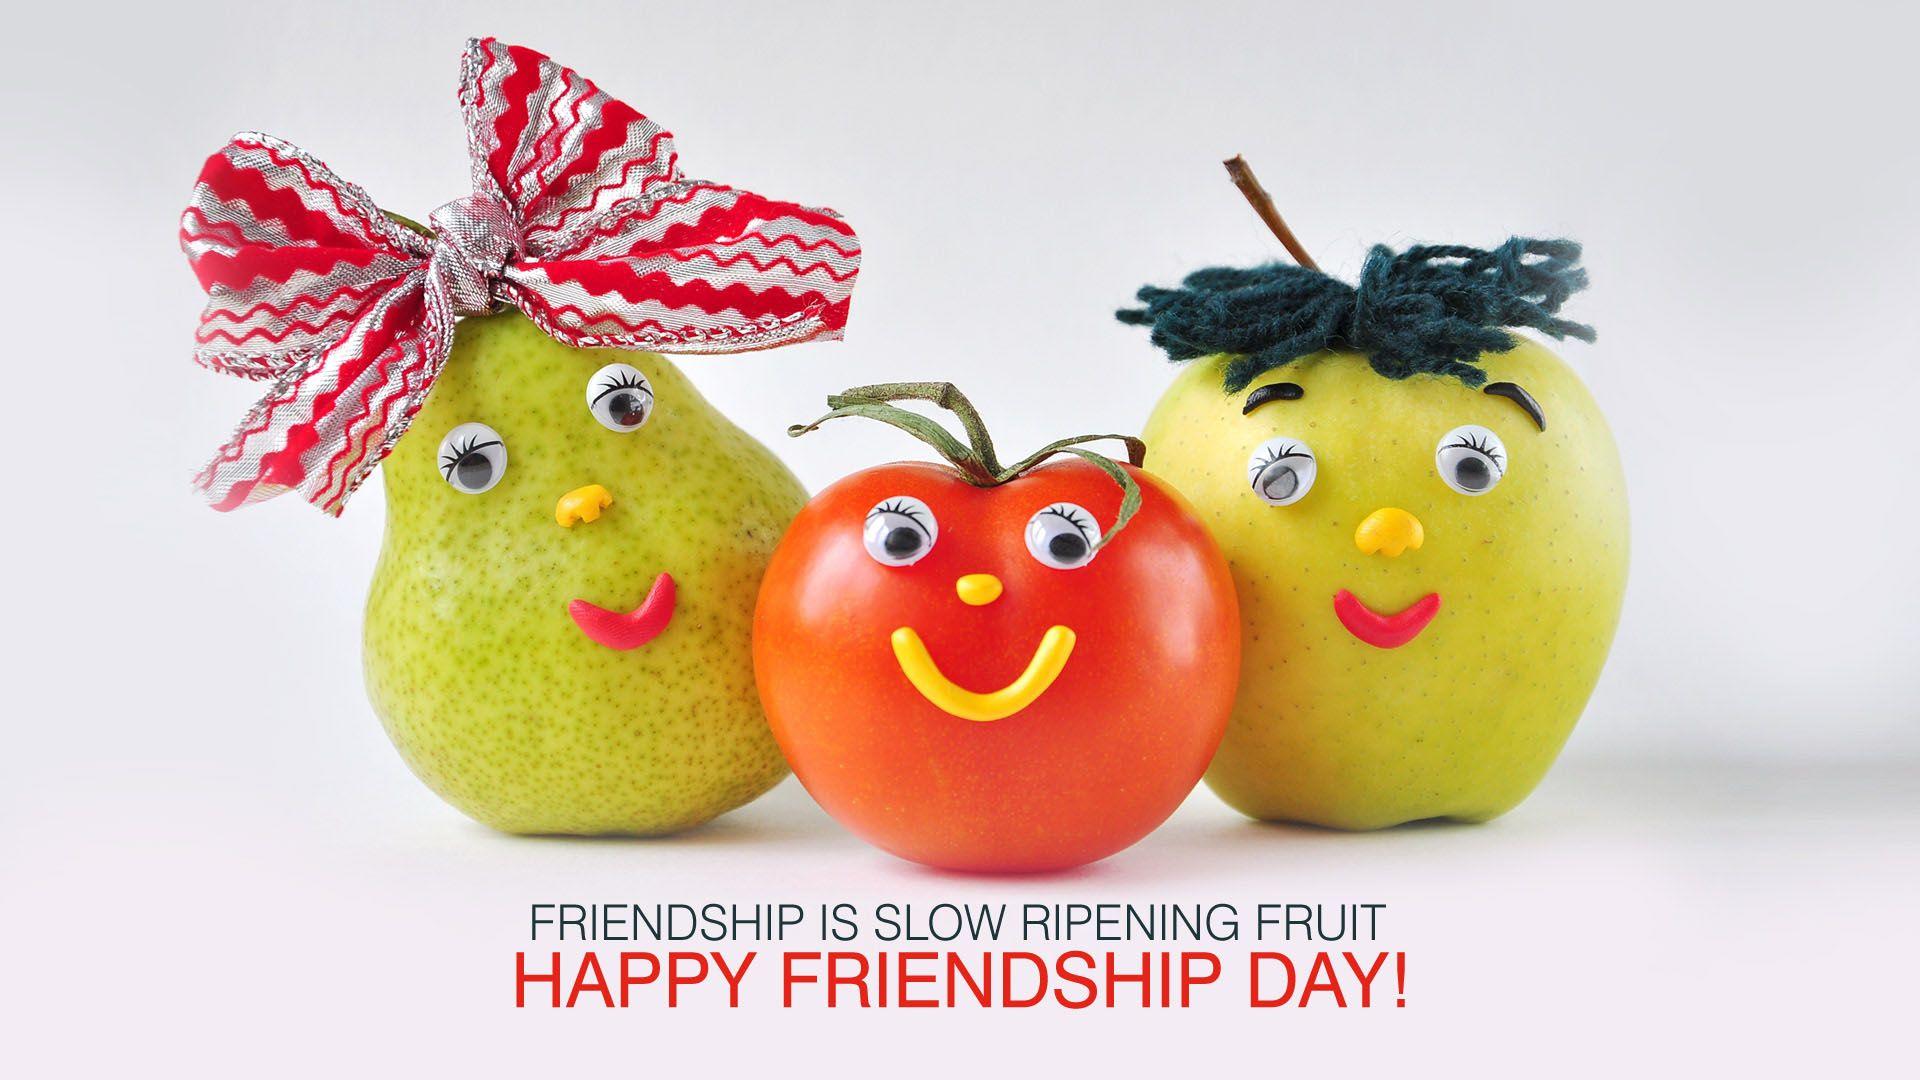 Friendship Day 2014 Free Download Of Picture. Newhdpics